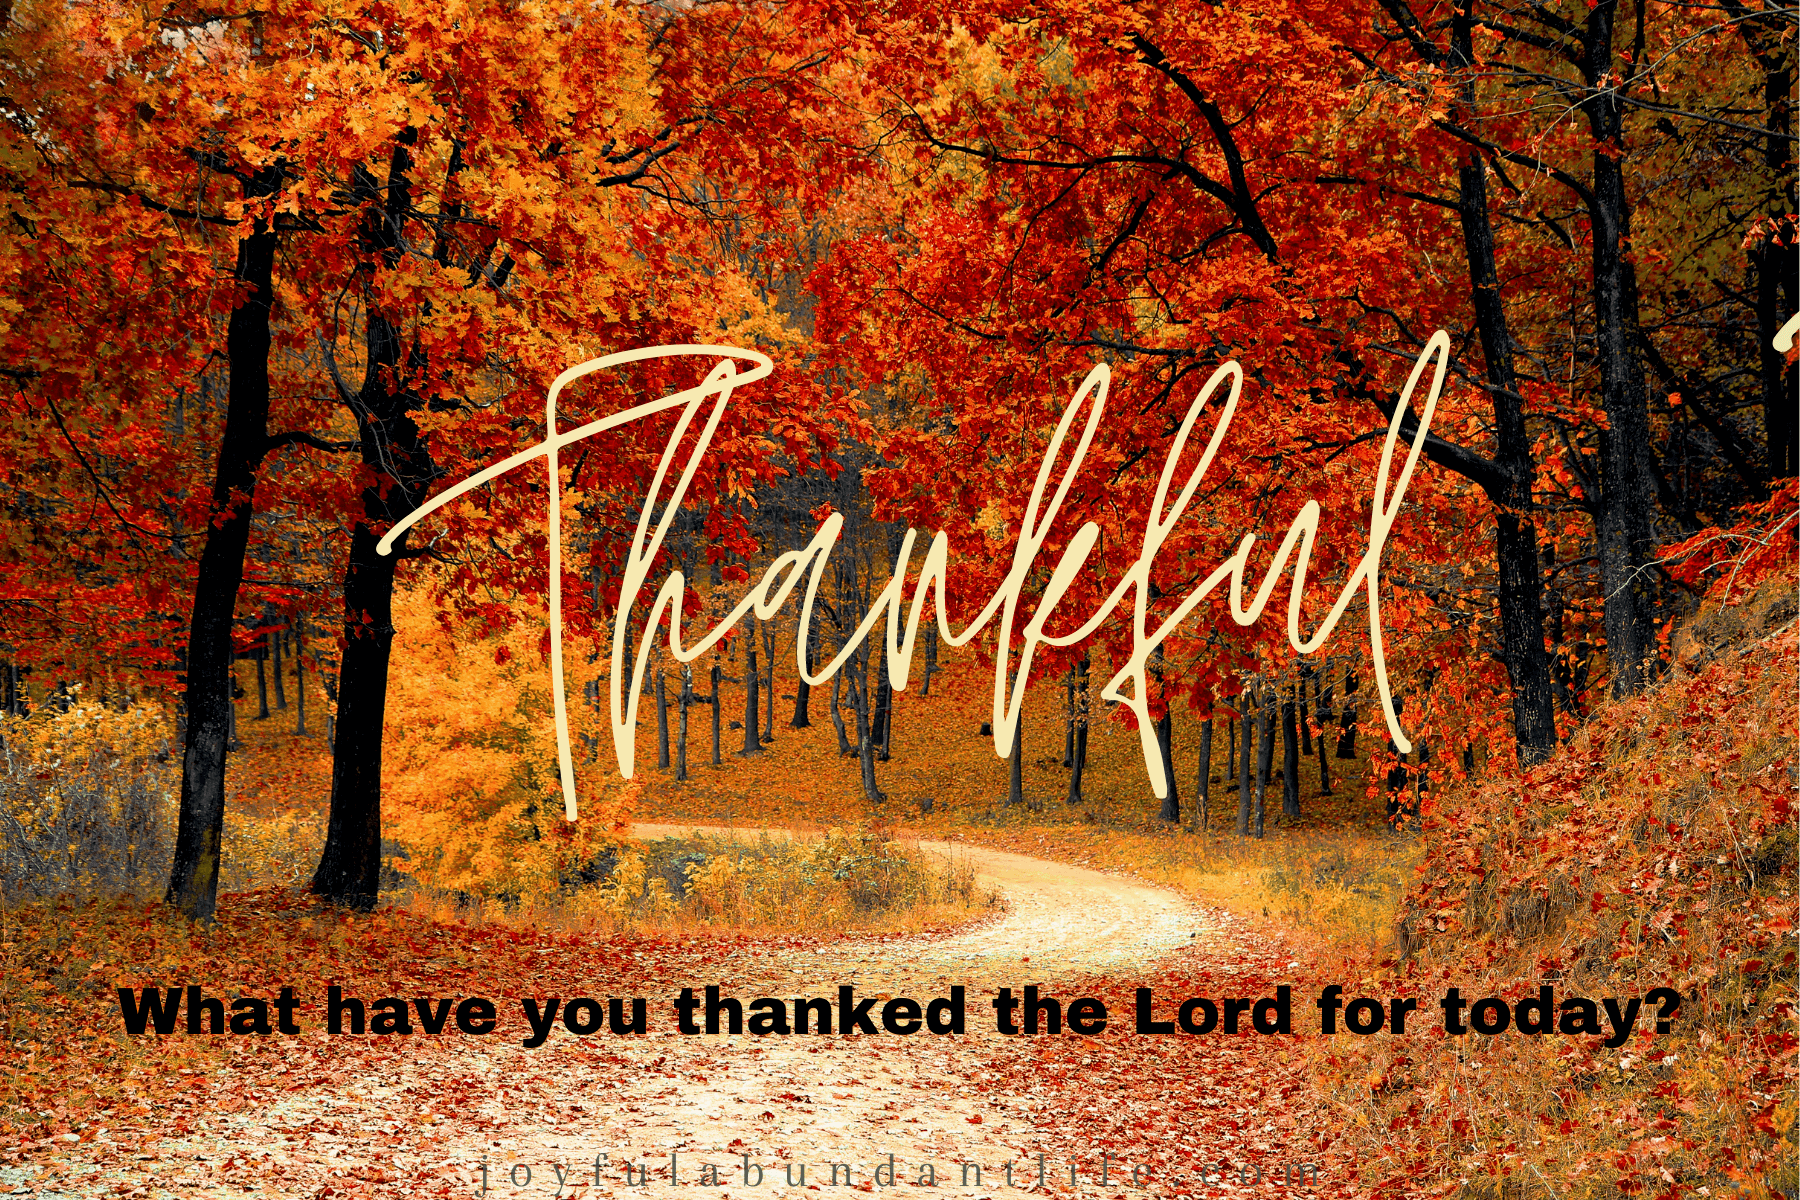 What have you thanked the Lord for today?